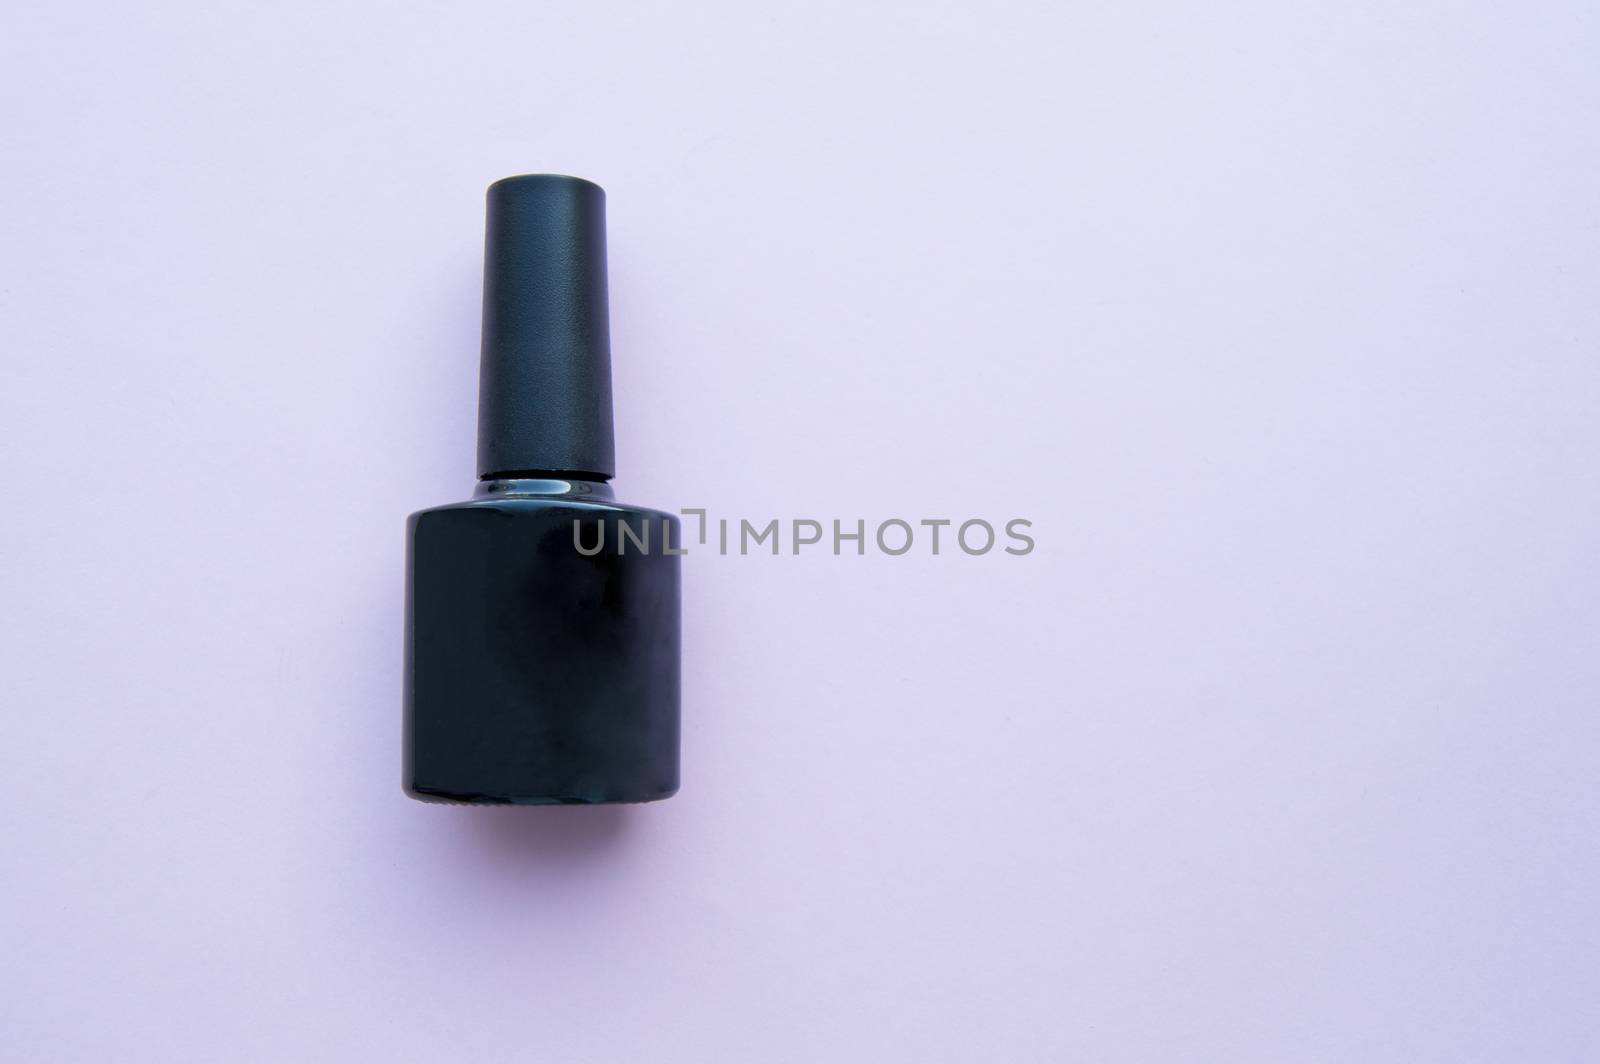 Pure black nail Polish bottle on lilac background, copy space, place for your text.